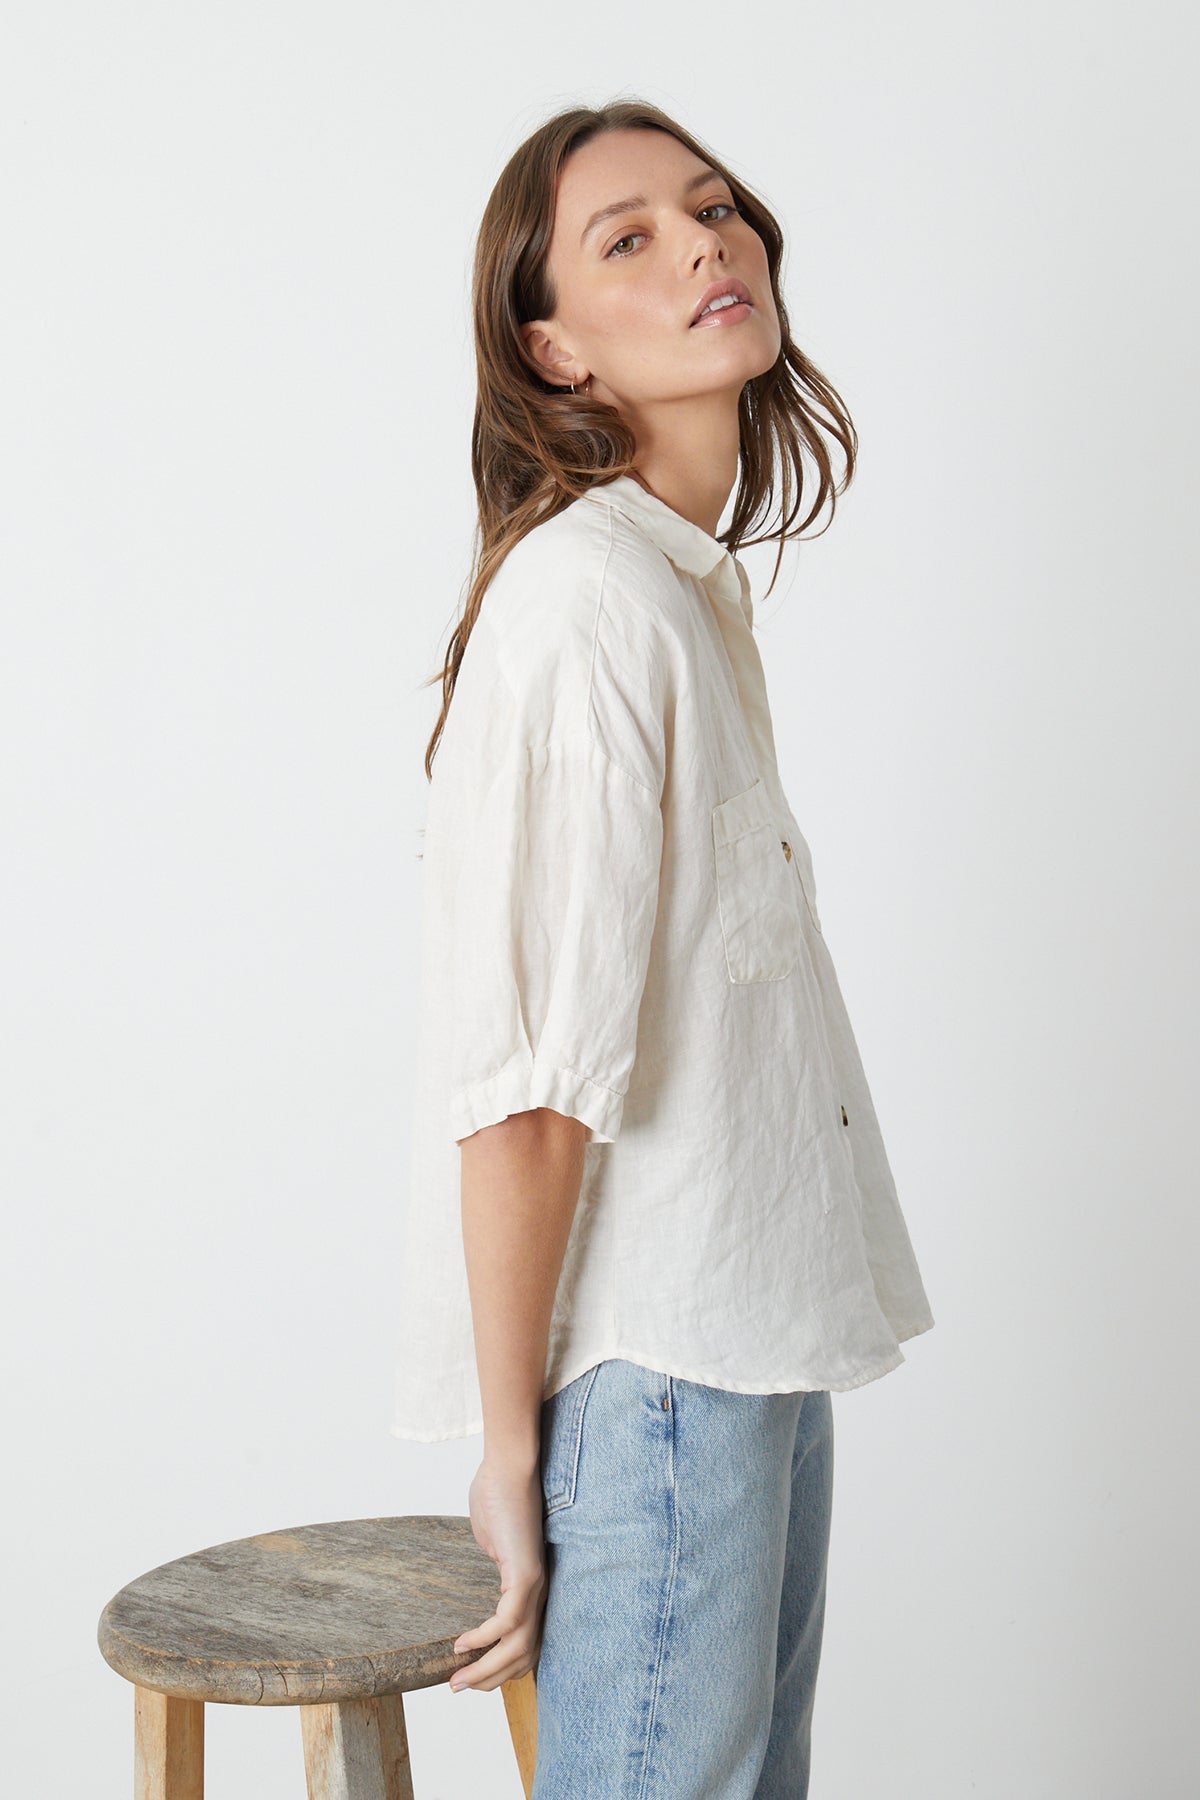 The model is wearing a white MARIA LINEN BUTTON-UP SHIRT by Velvet by Graham & Spencer and jeans.-26715367014593